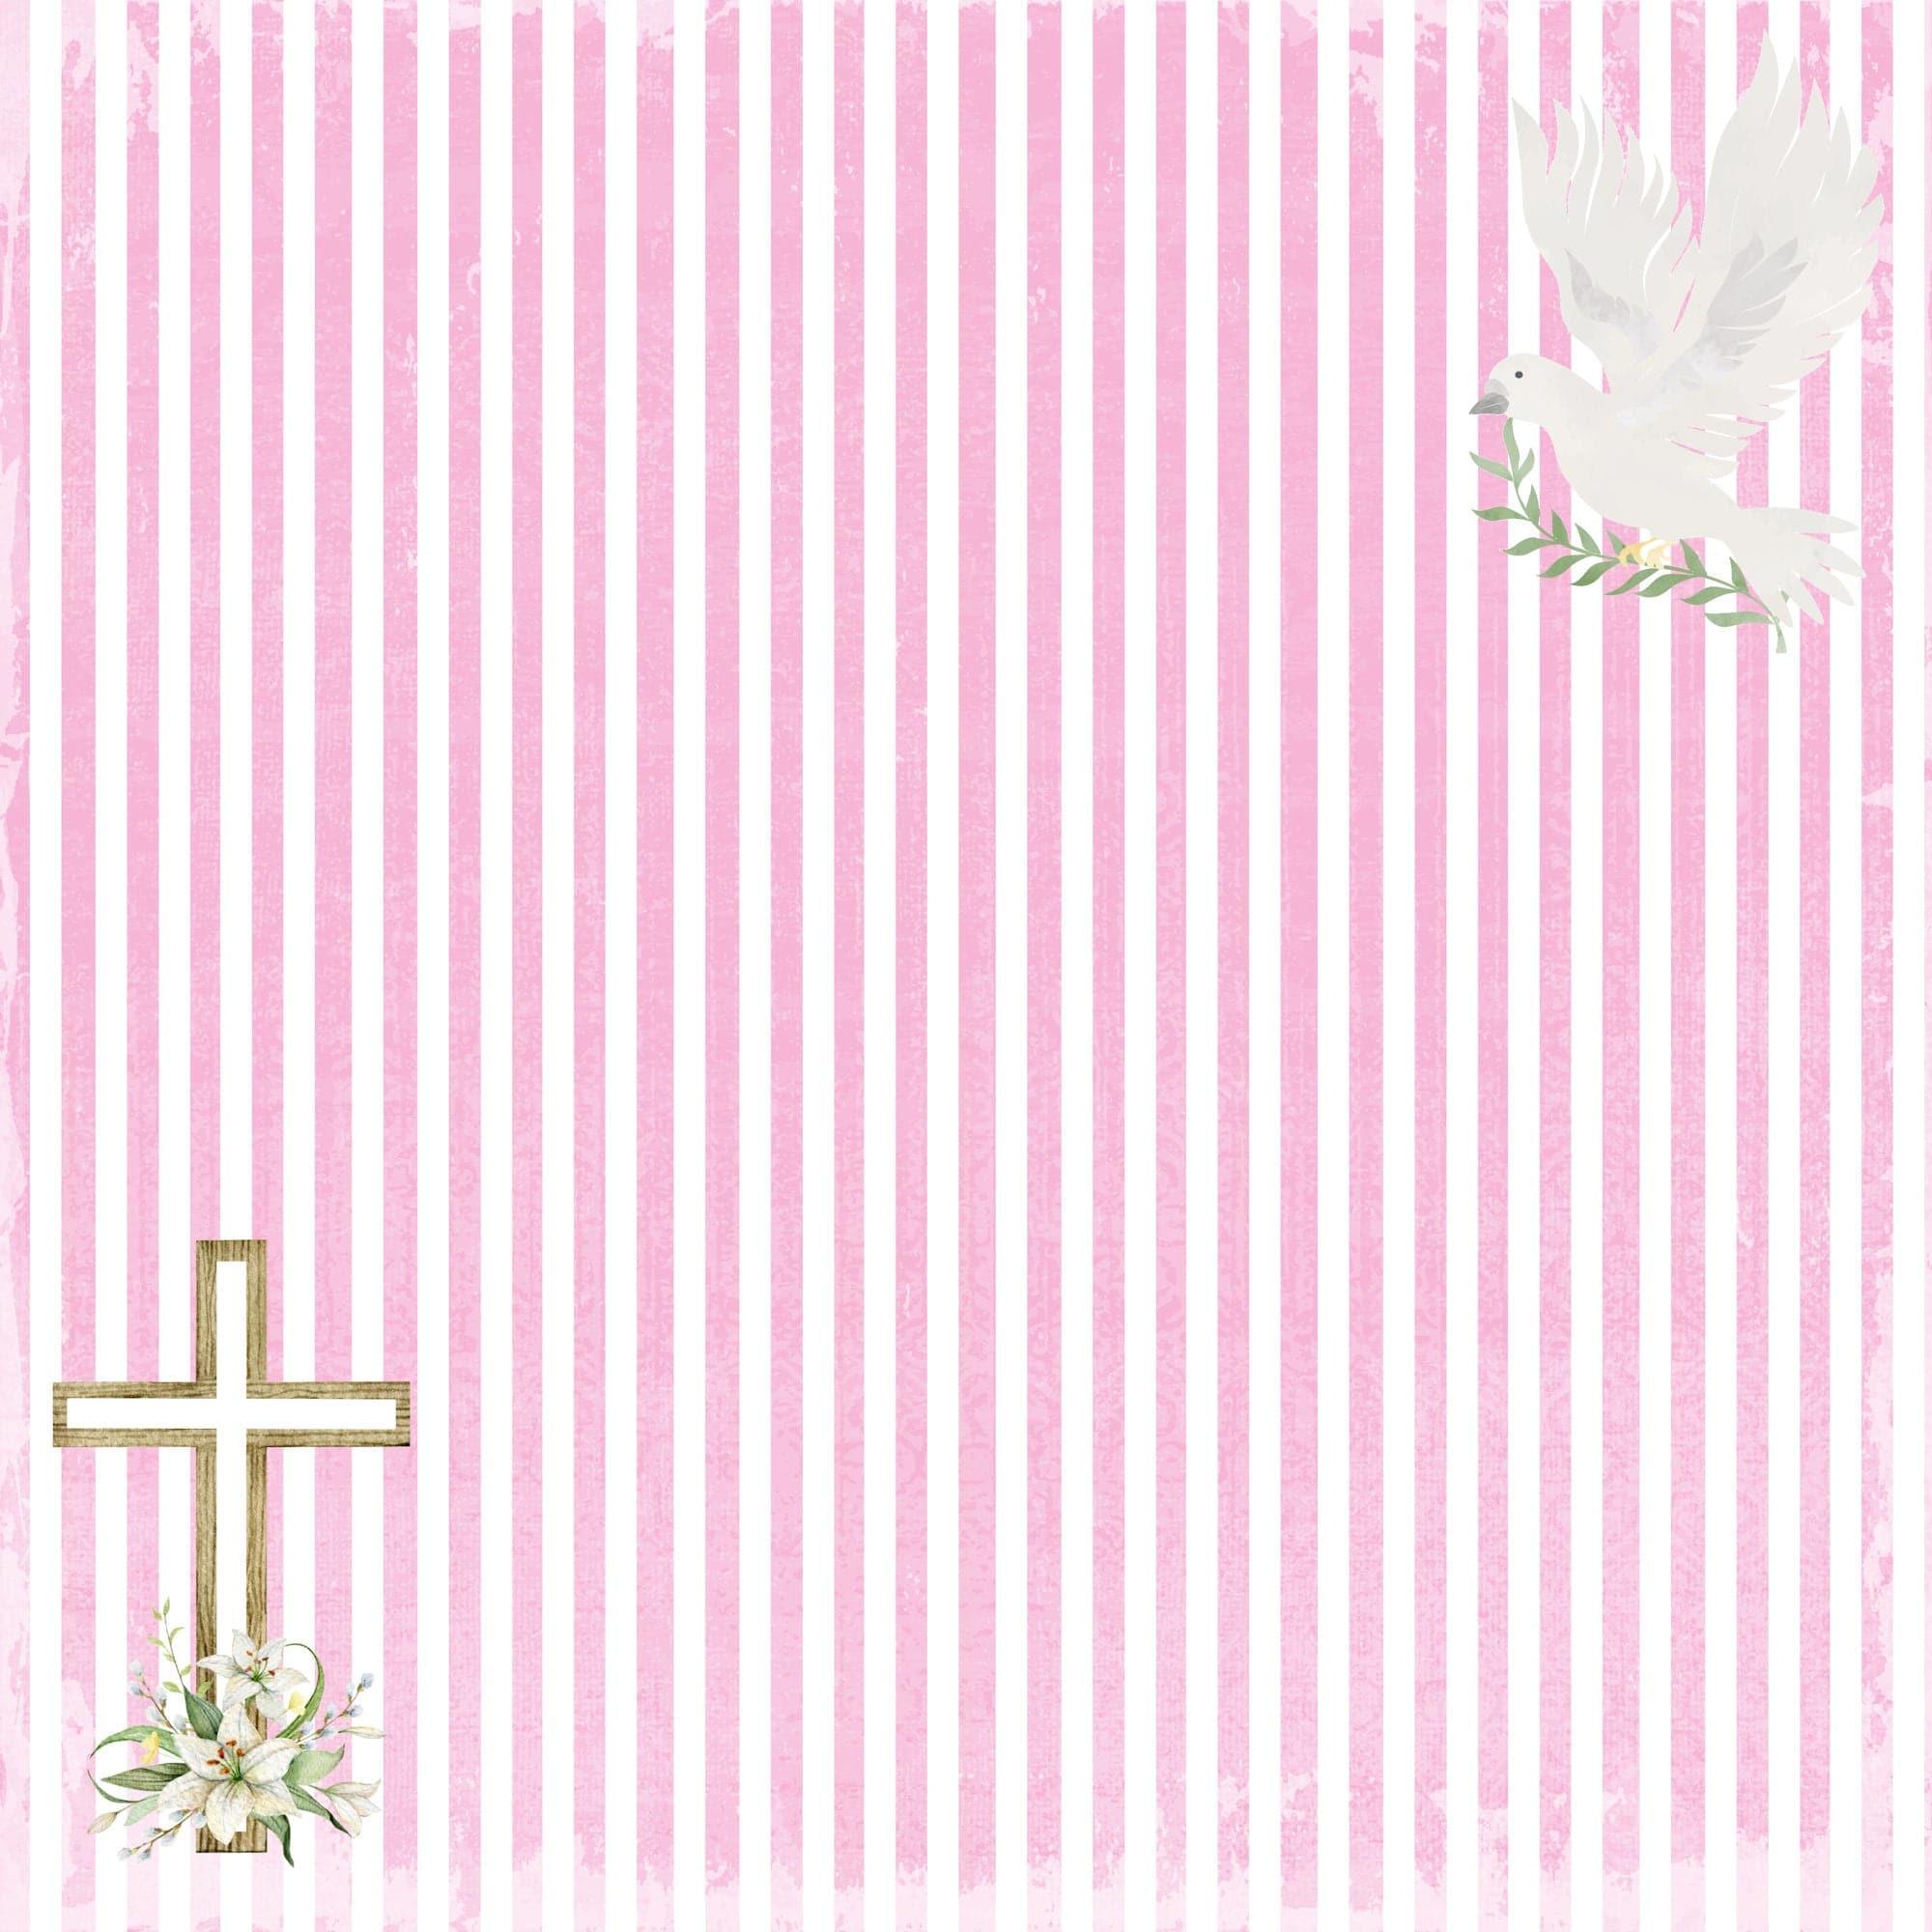 Holy Sacraments Collection Goddaughter 12 x 12 Double-Sided Scrapbook Paper by SSC Designs - Scrapbook Supply Companies